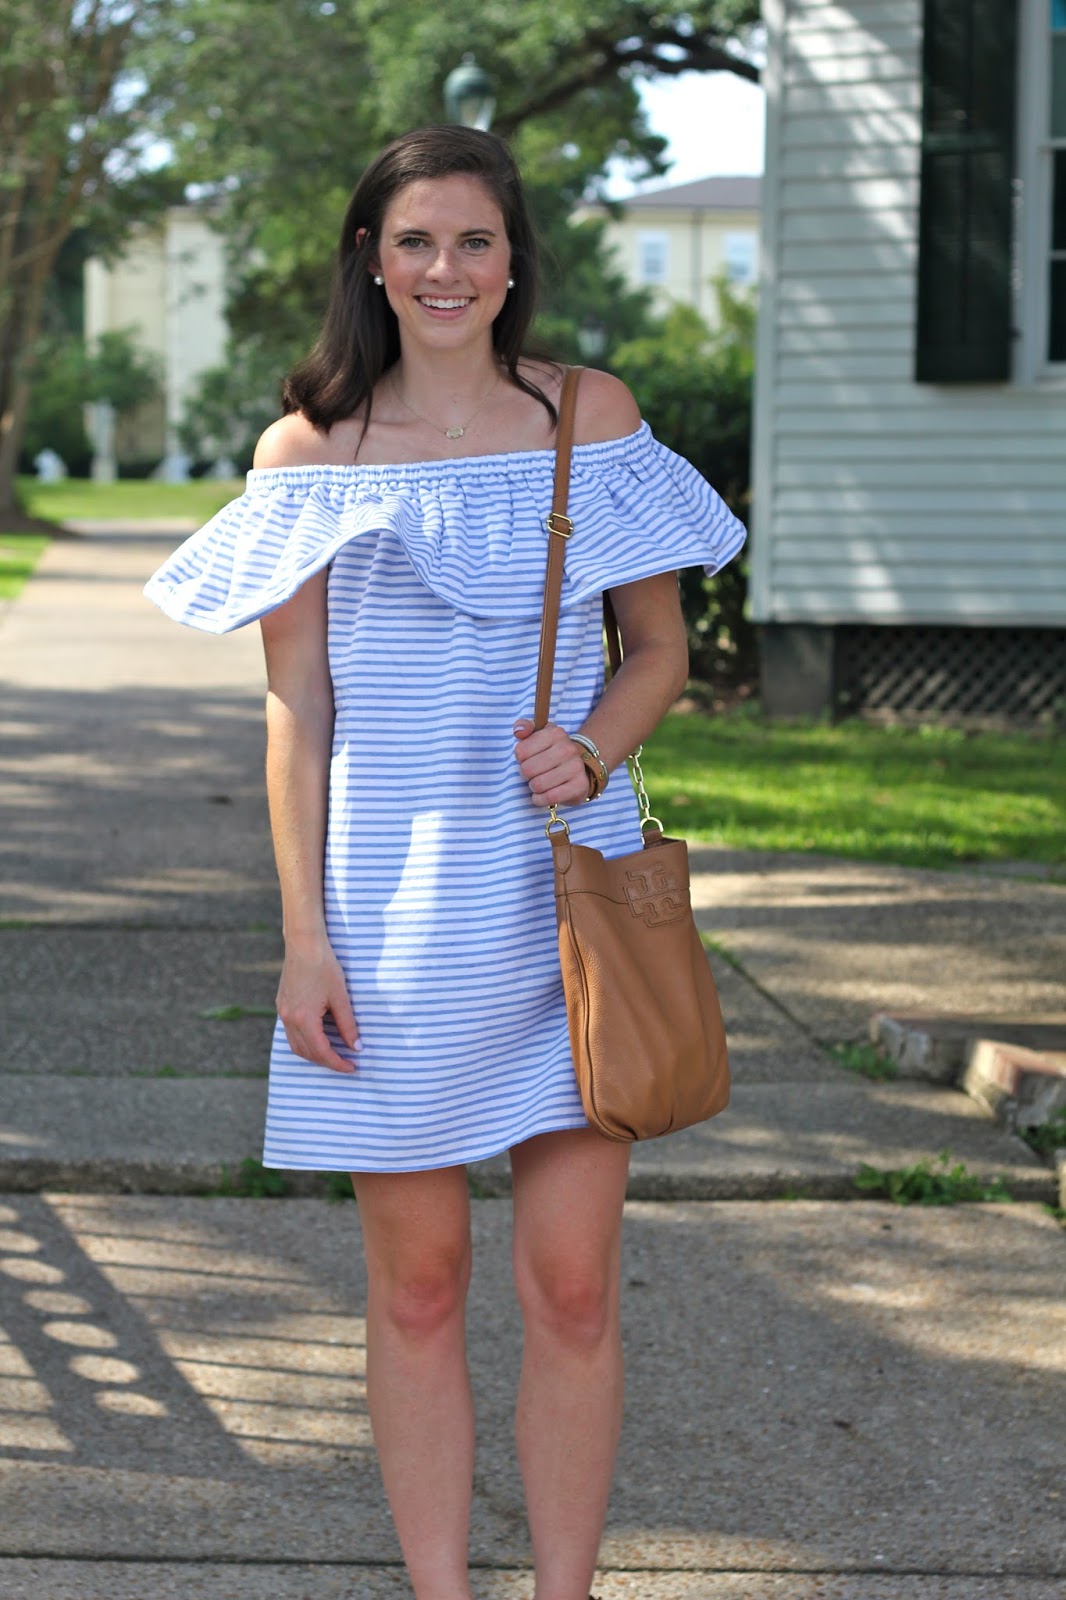 Prep In Your Step: Ruffled, White, and Blue